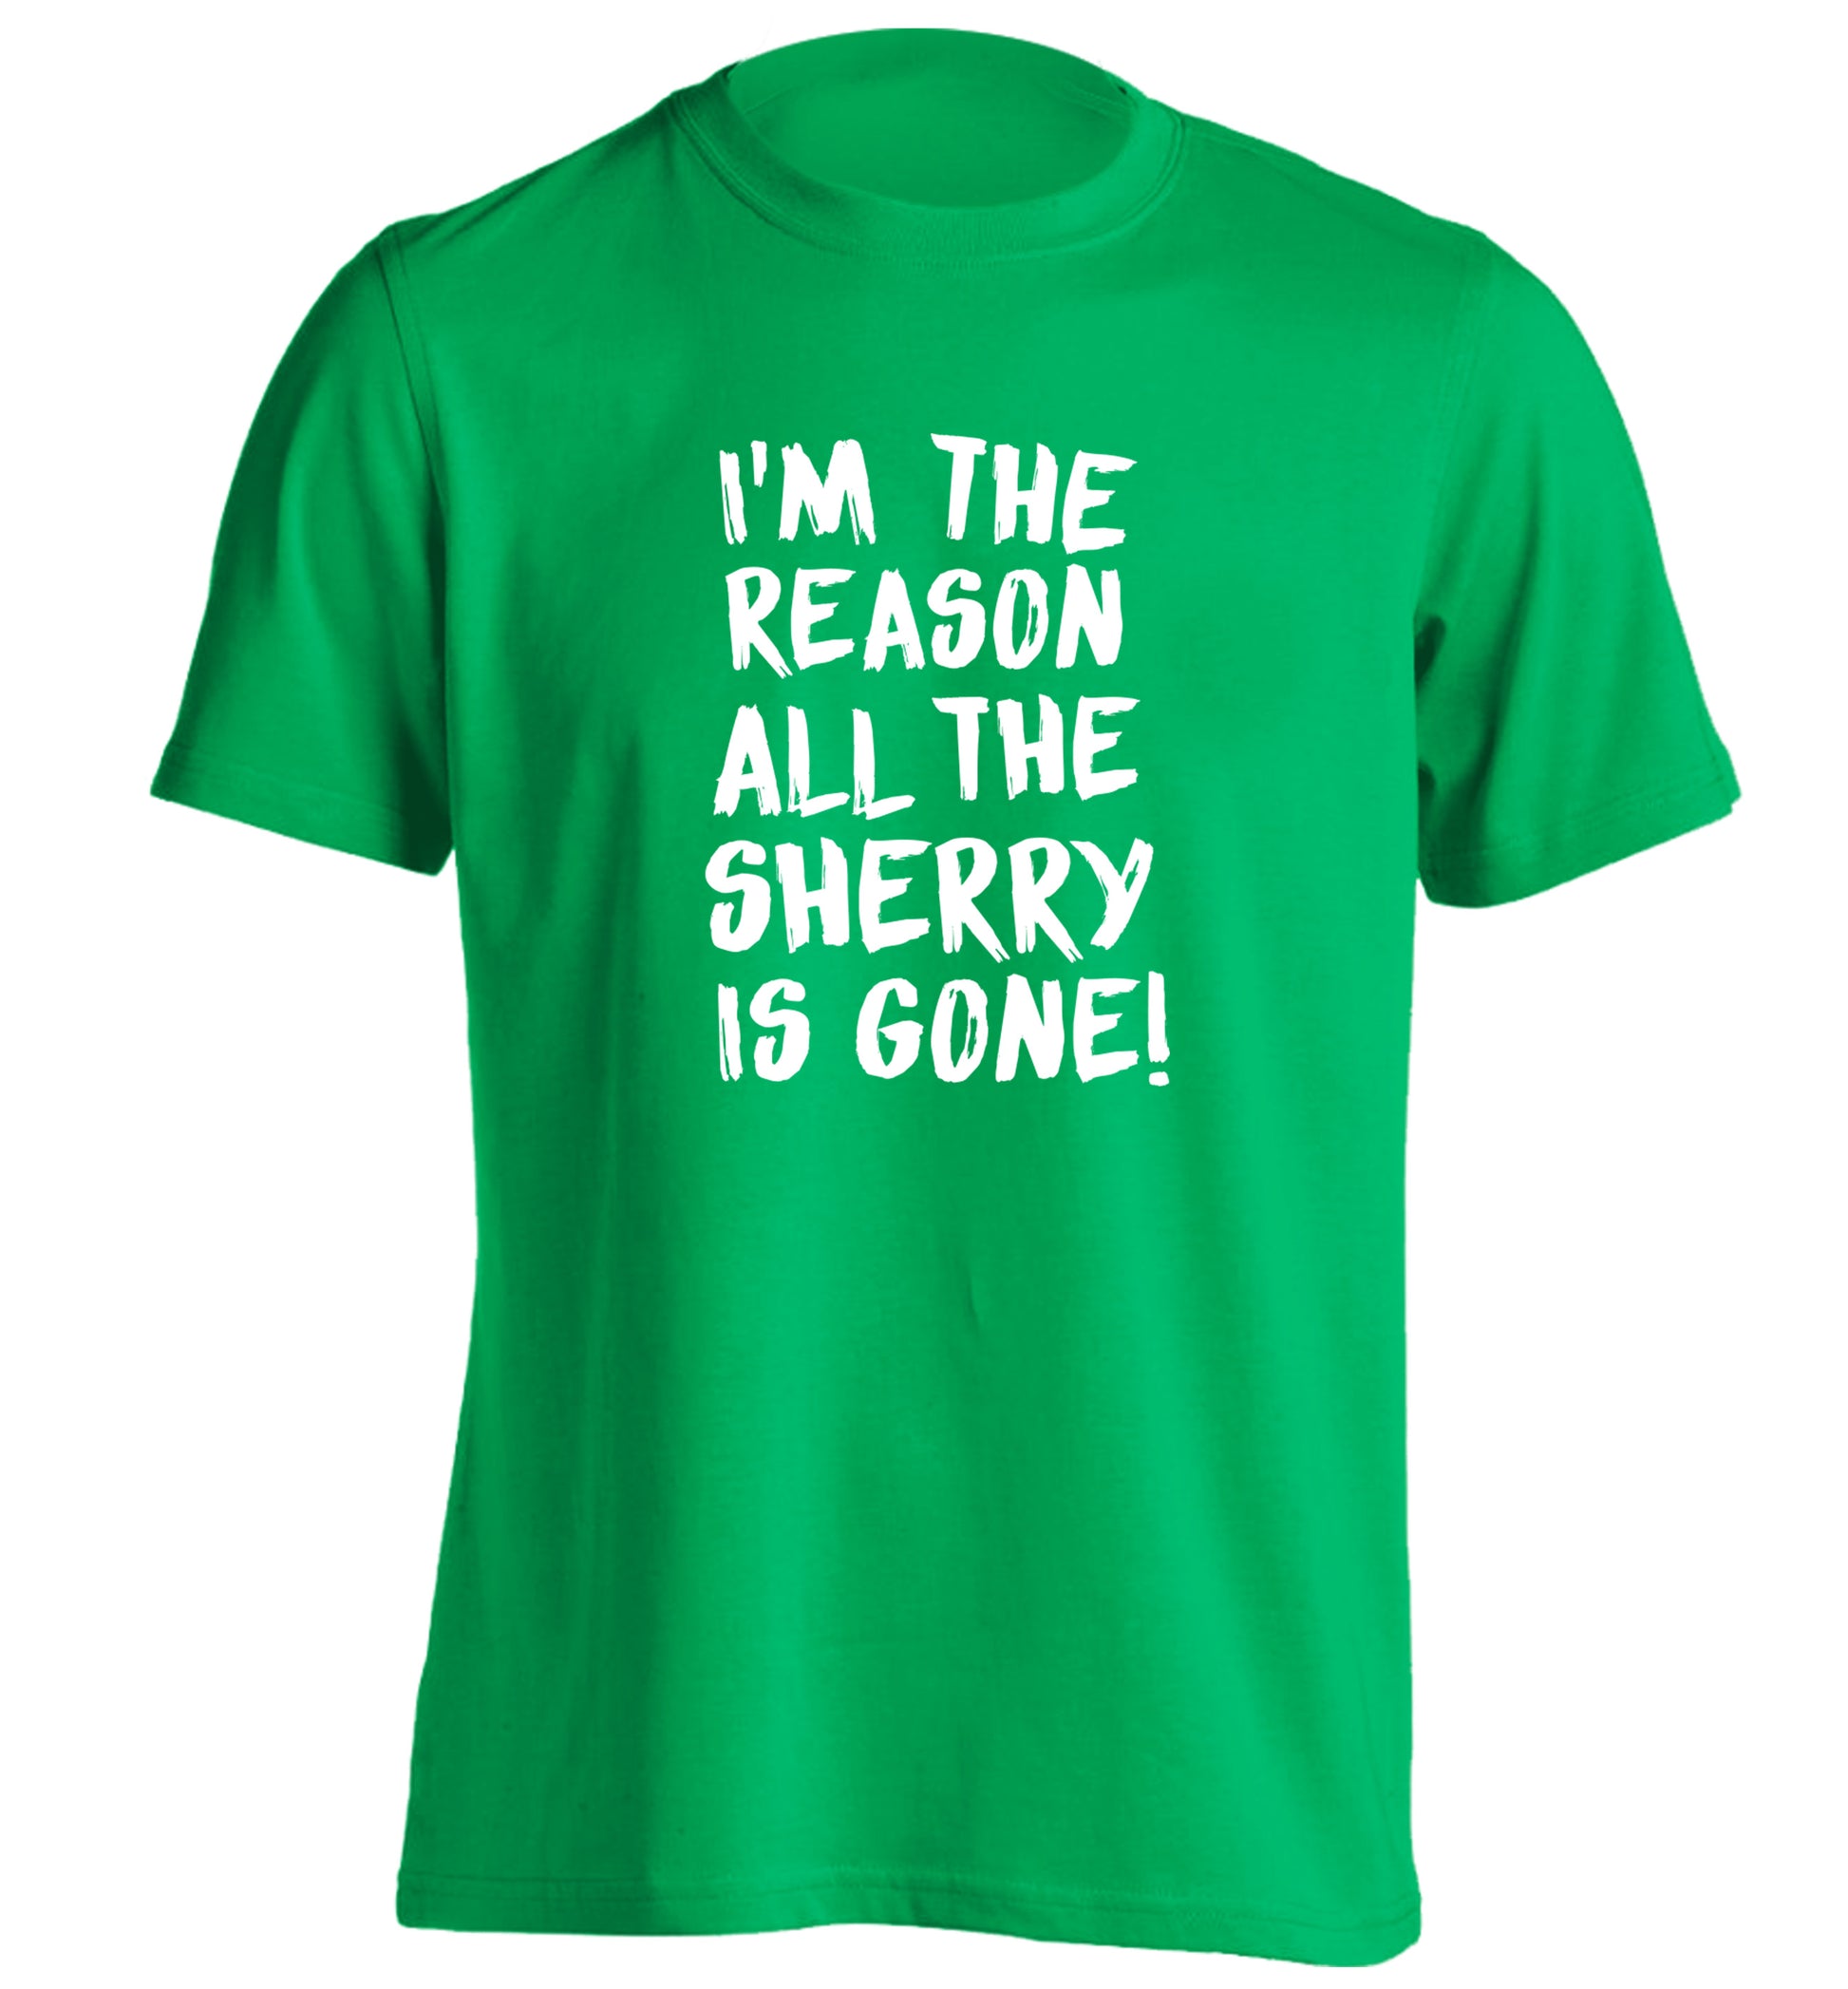 I'm the reason all the sherry is gone adults unisex green Tshirt 2XL